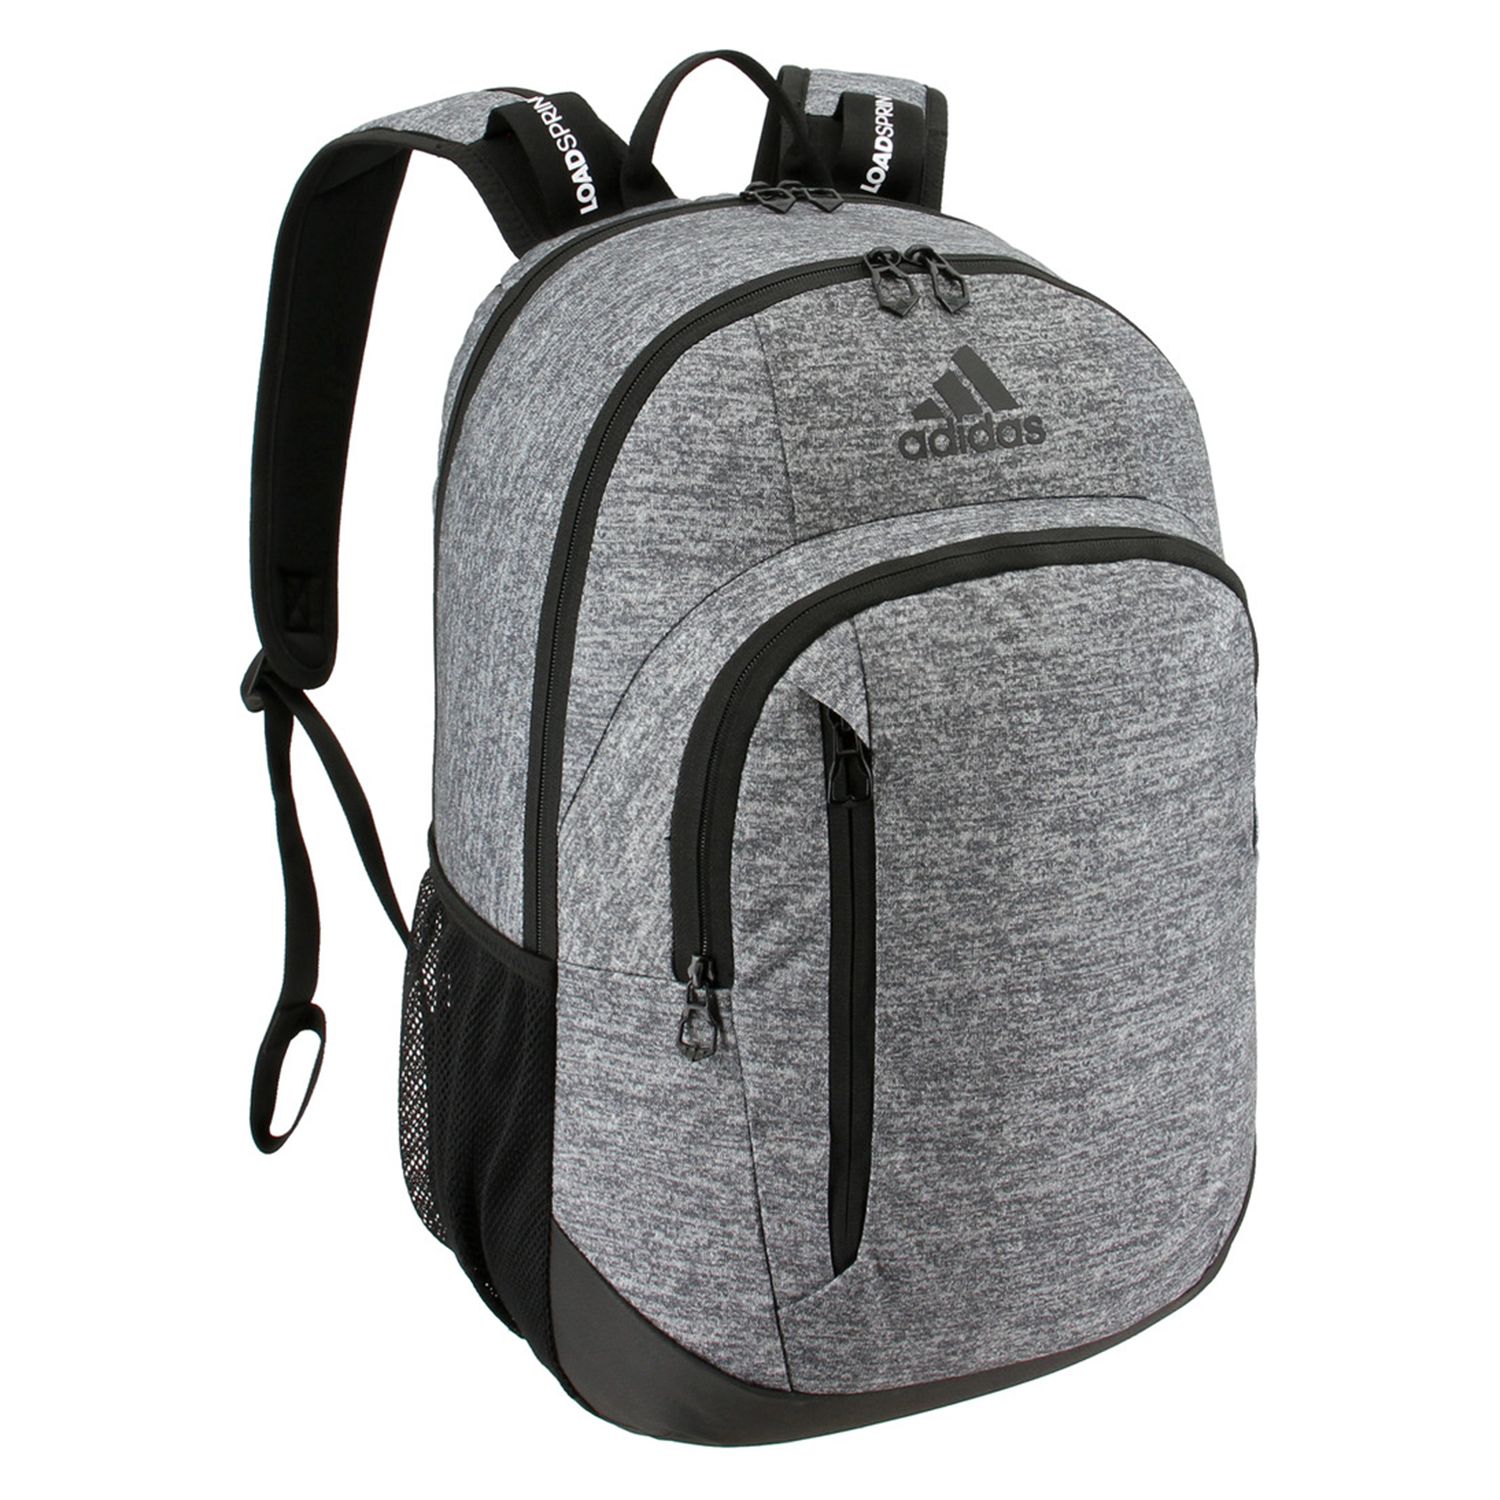 adidas mission 2 backpack